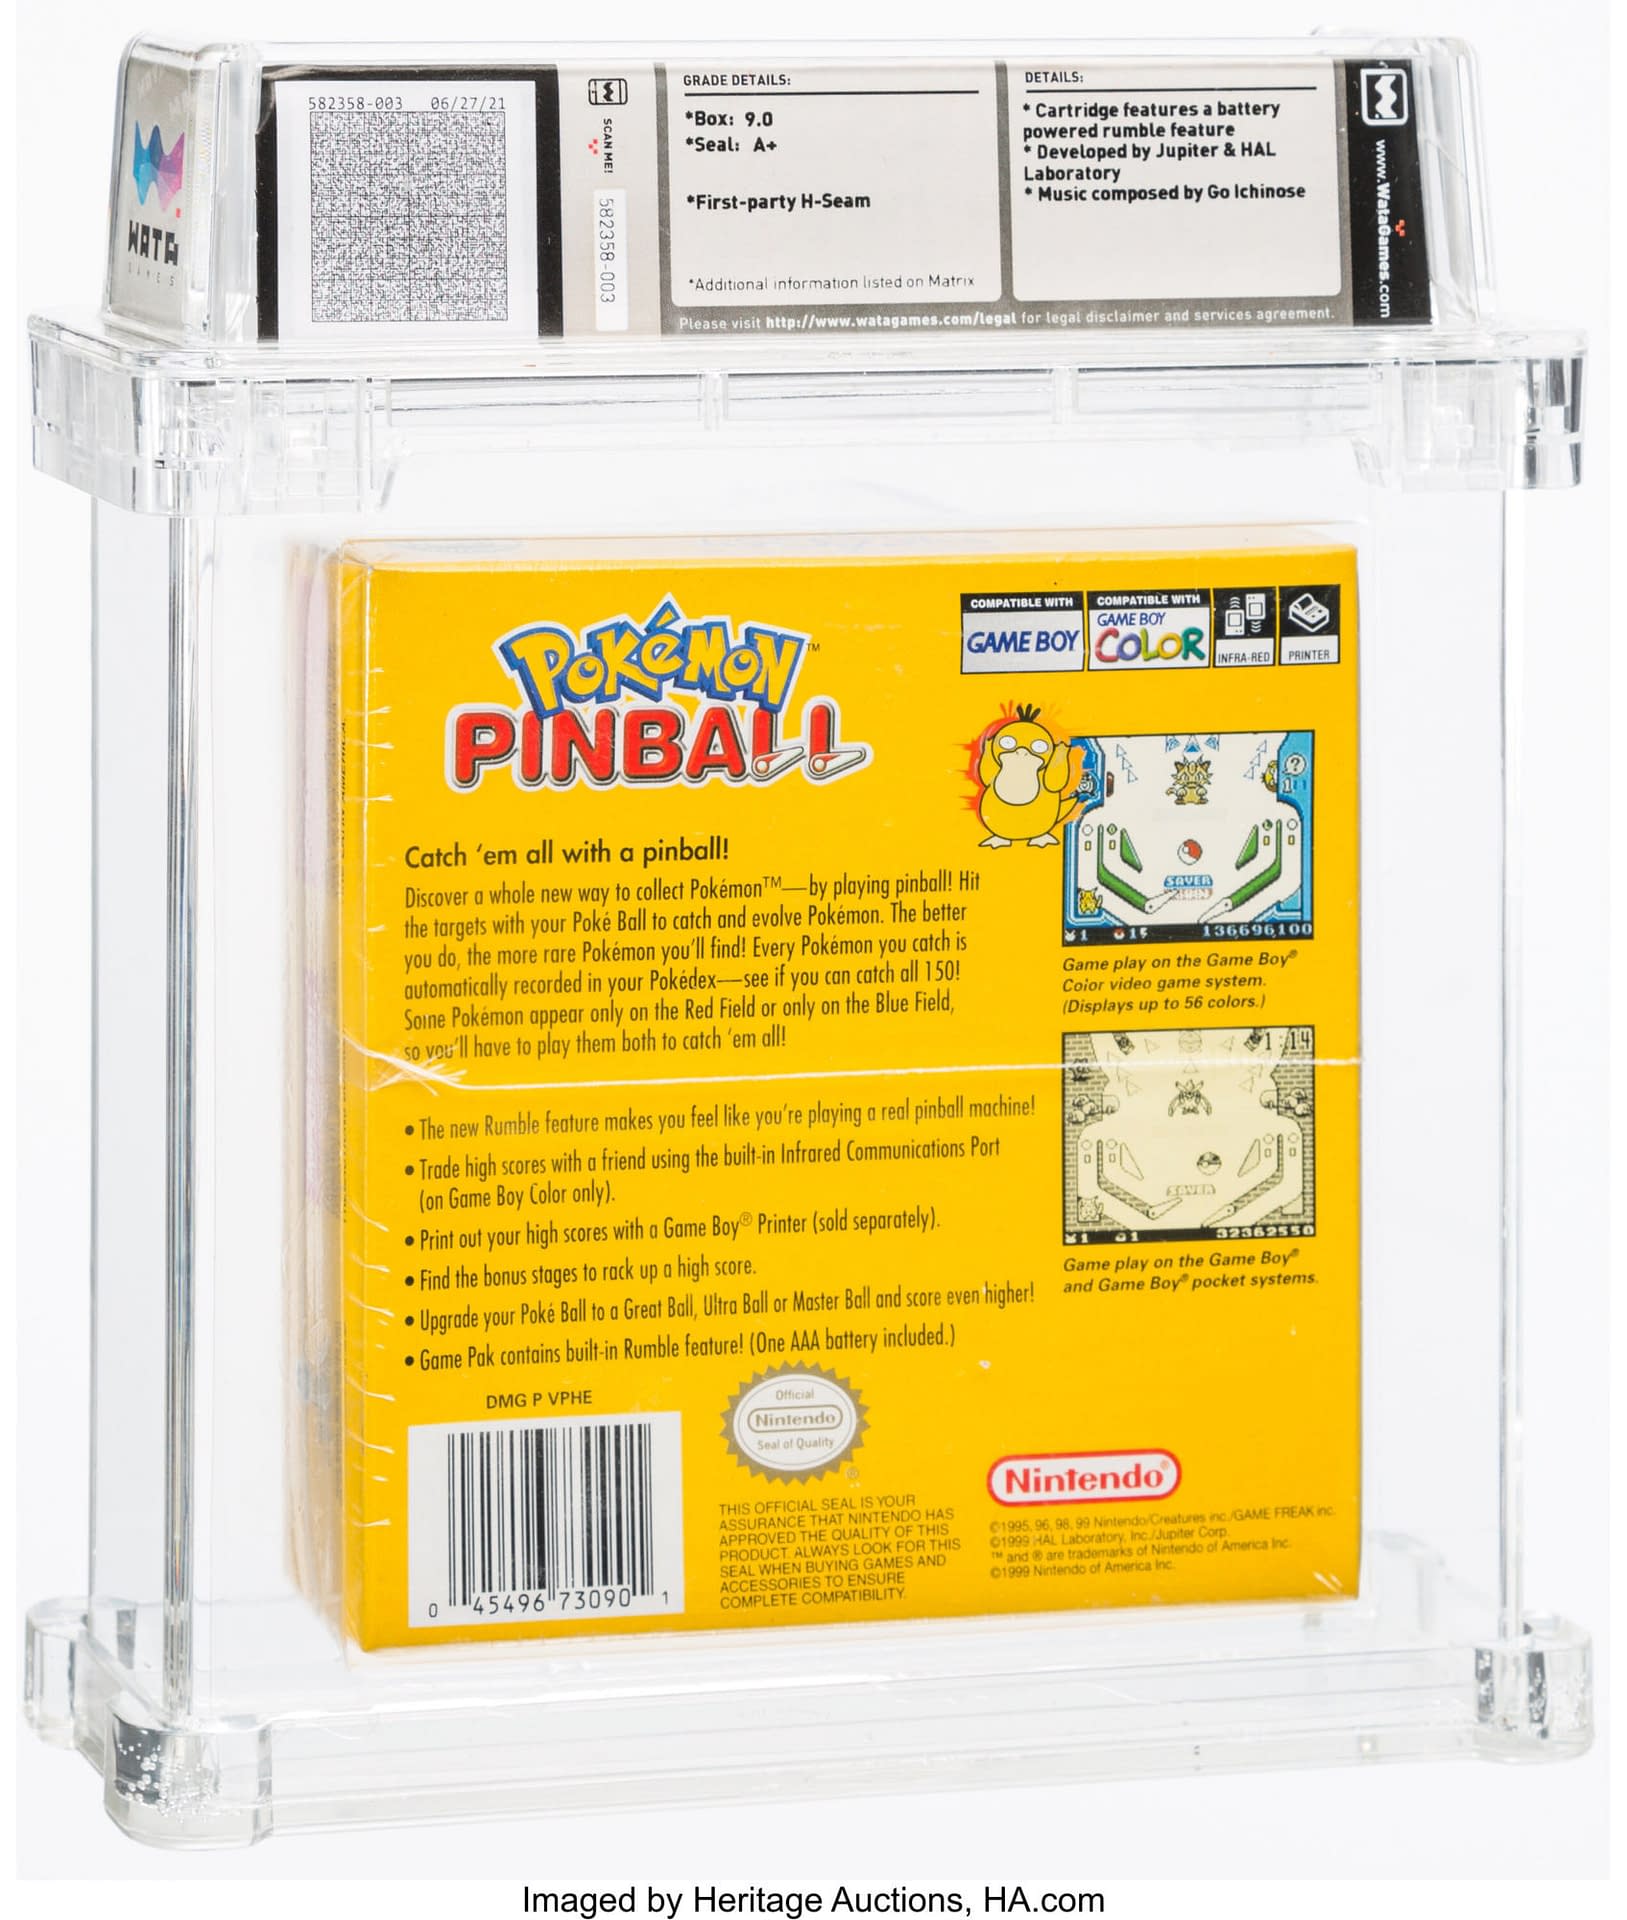 Pokémon Emerald, Graded 9.6 WATA A+, Auctioning At ComicConnect